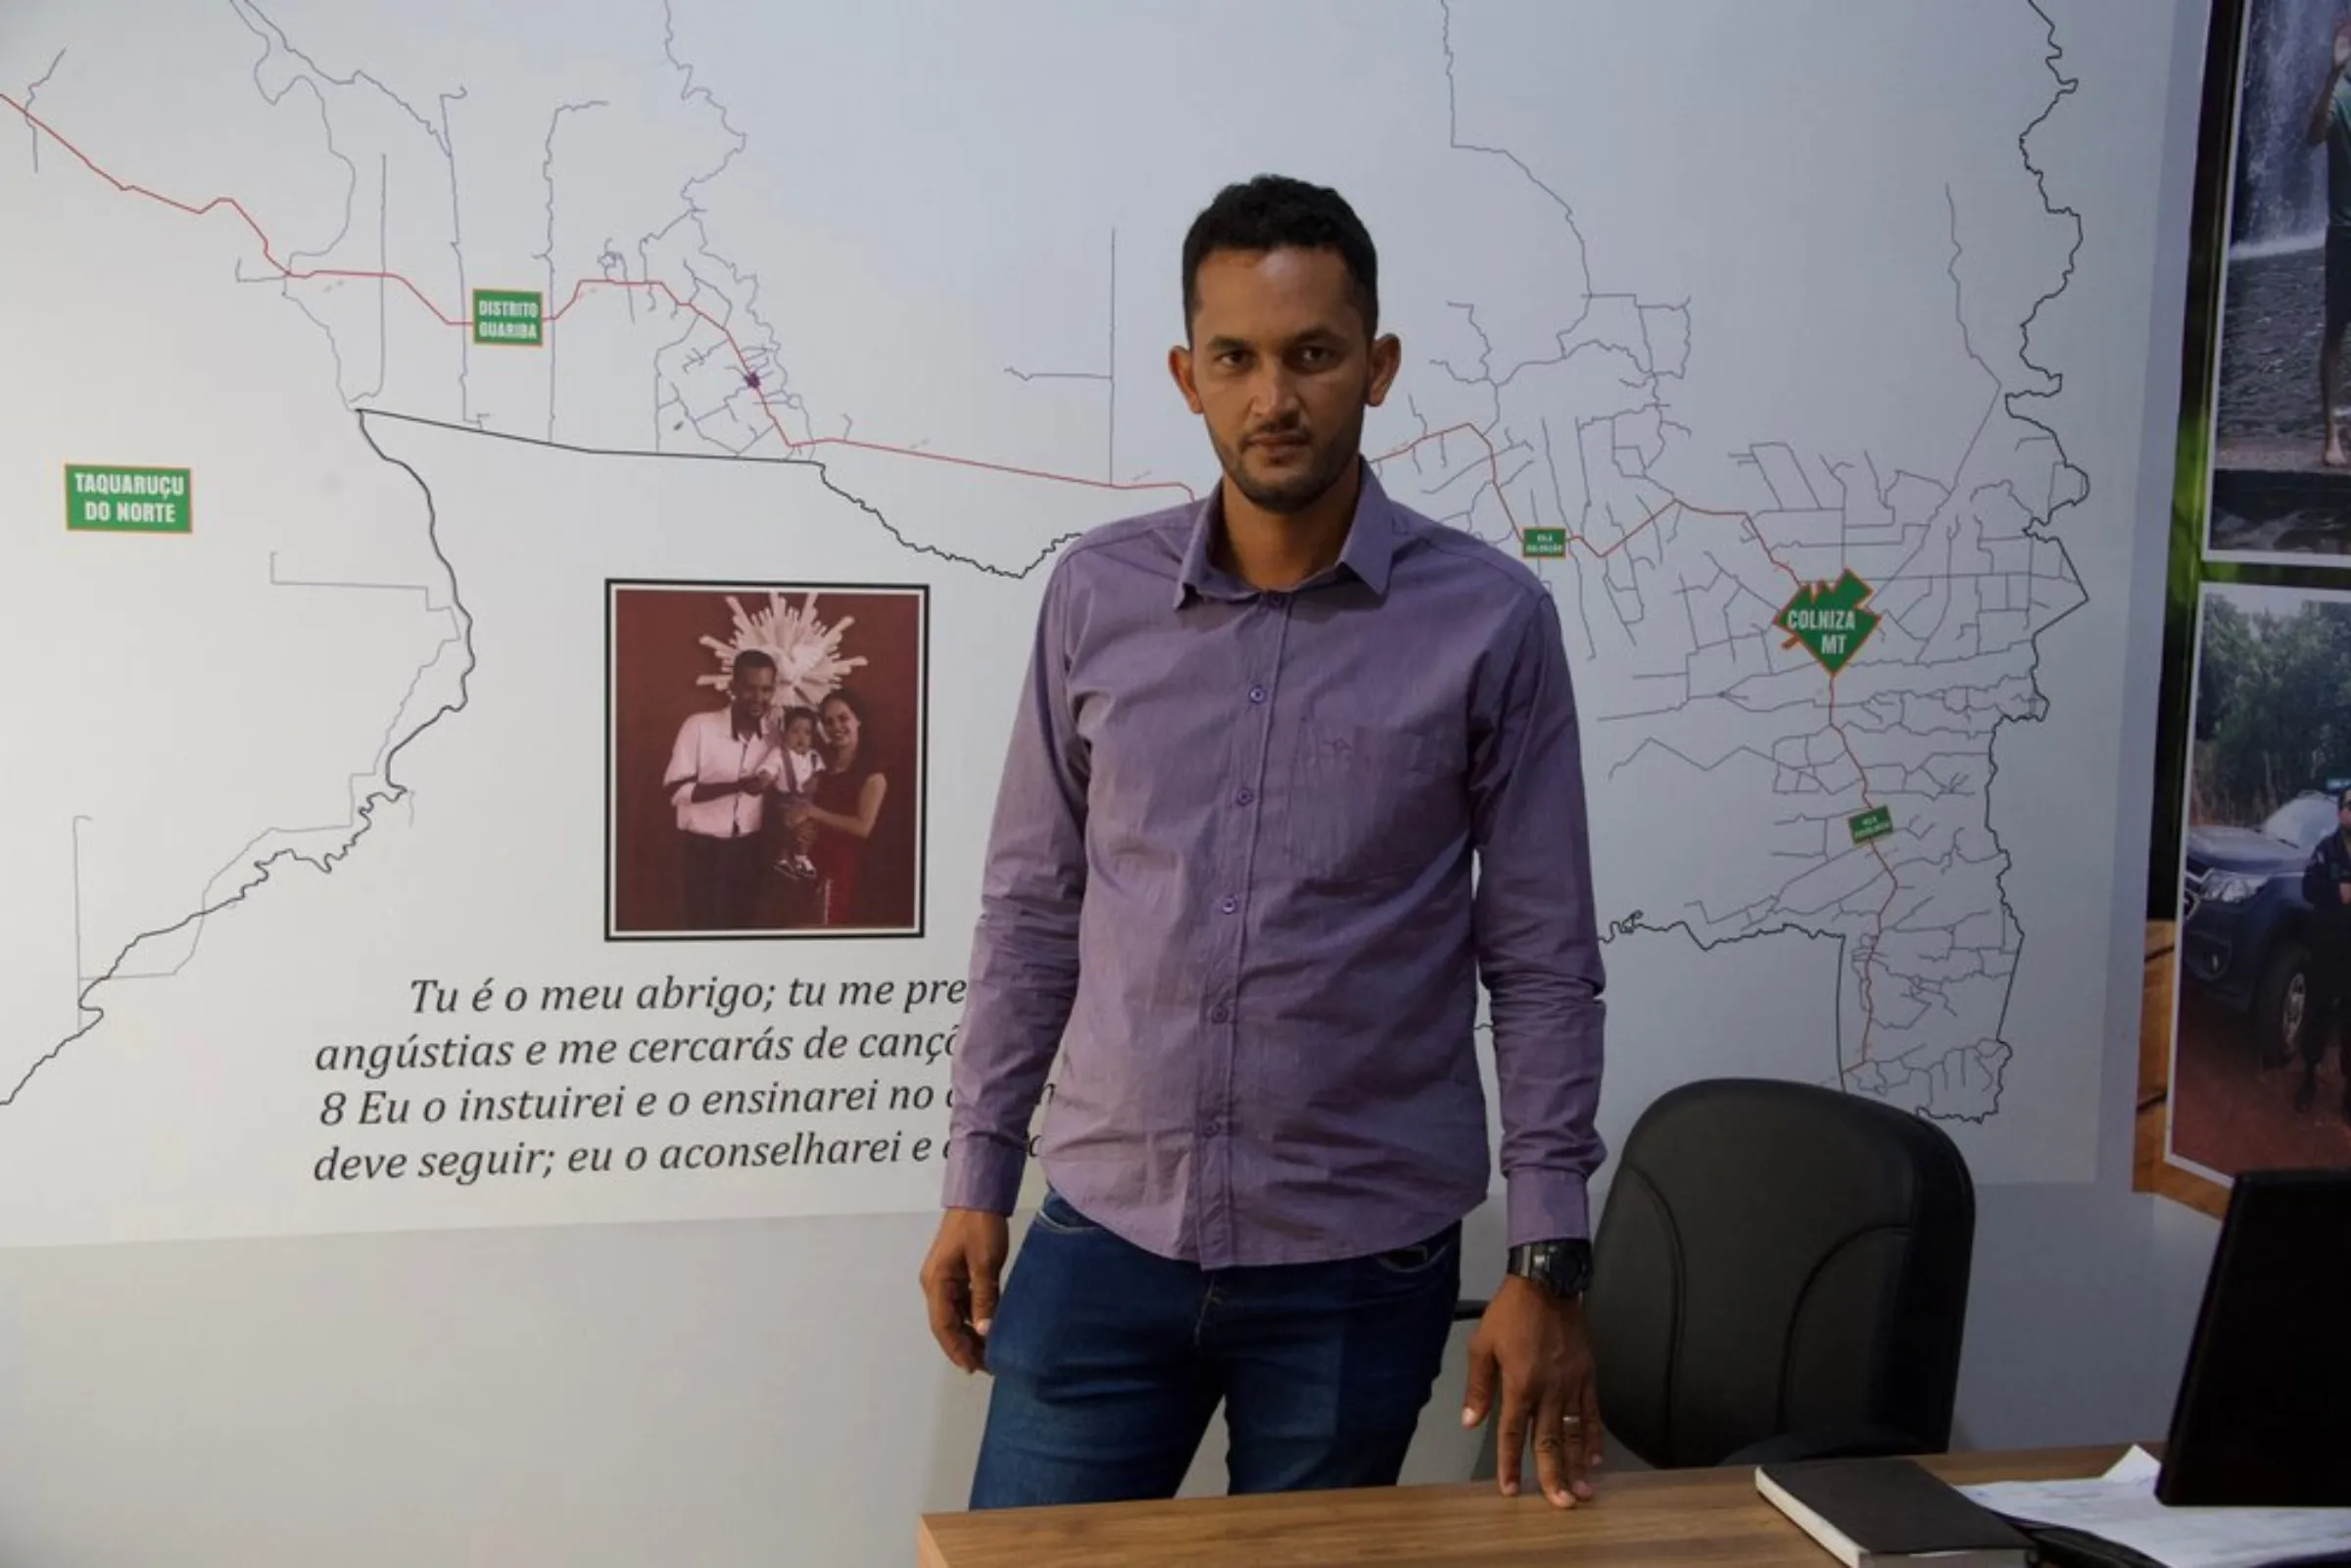 Colniza councilman Luis Carlos Silva poses for a picture in his office, in Colniza, in the state of Mato Grosso, Brazil, May 31, 2022